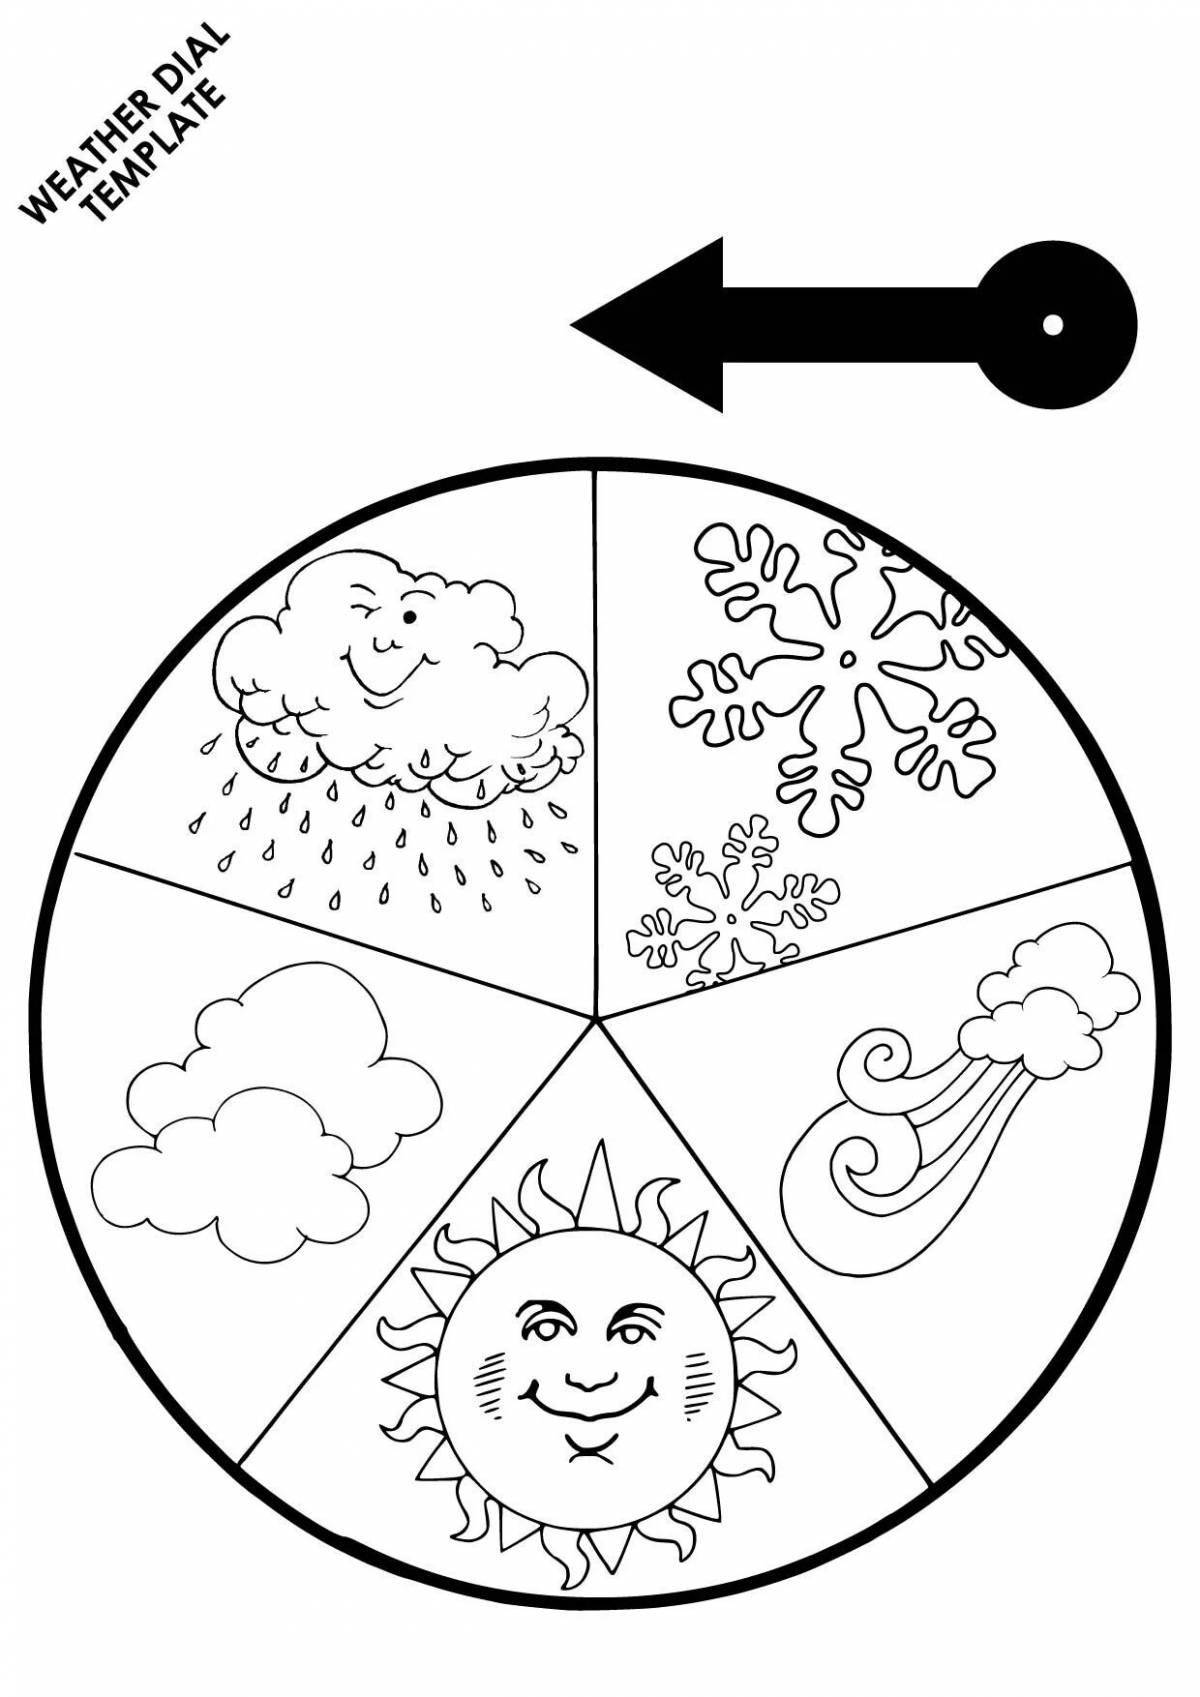 Colorful children's coloring pages